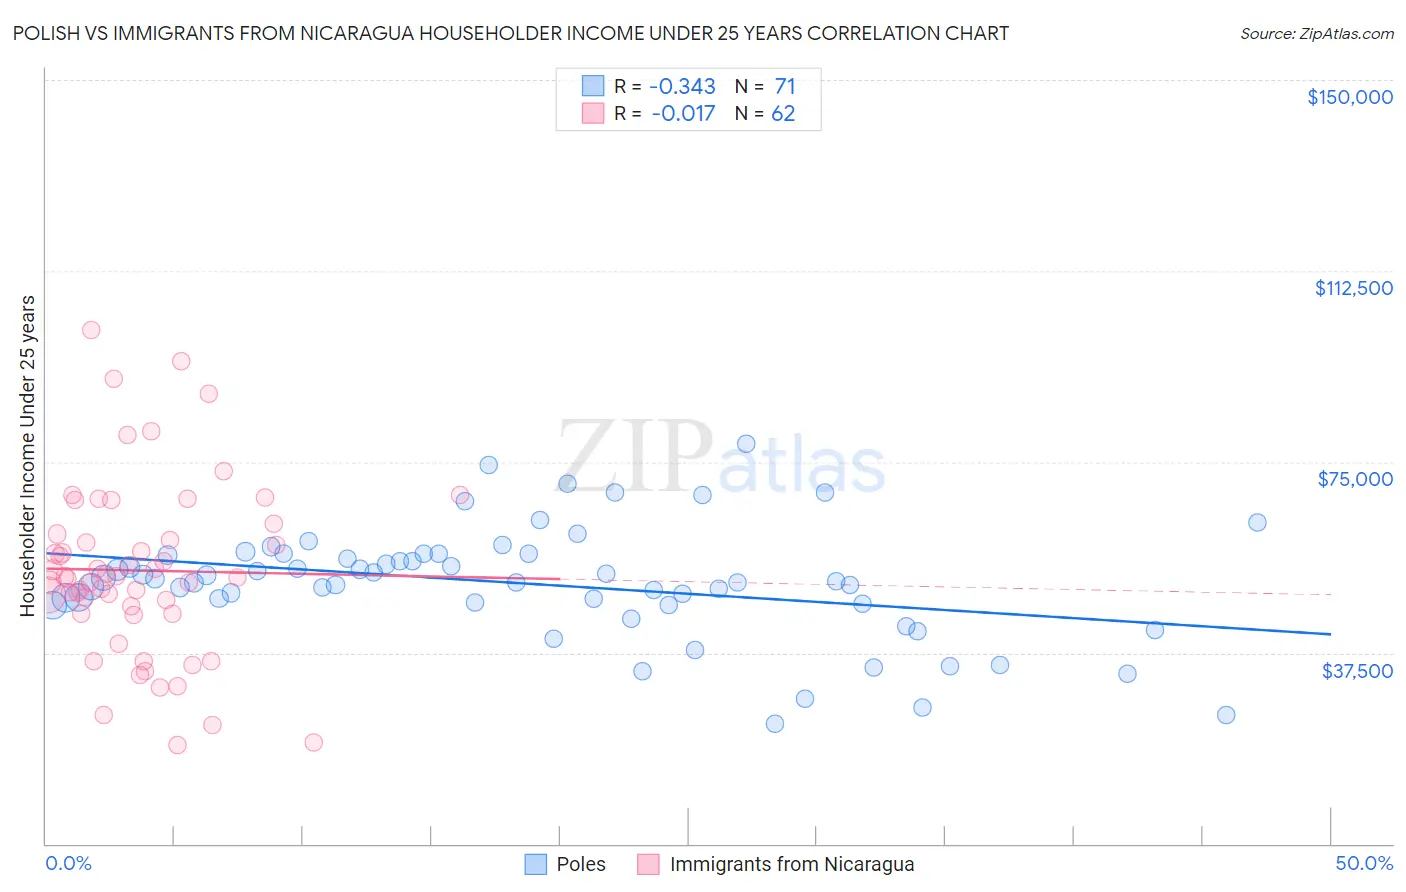 Polish vs Immigrants from Nicaragua Householder Income Under 25 years